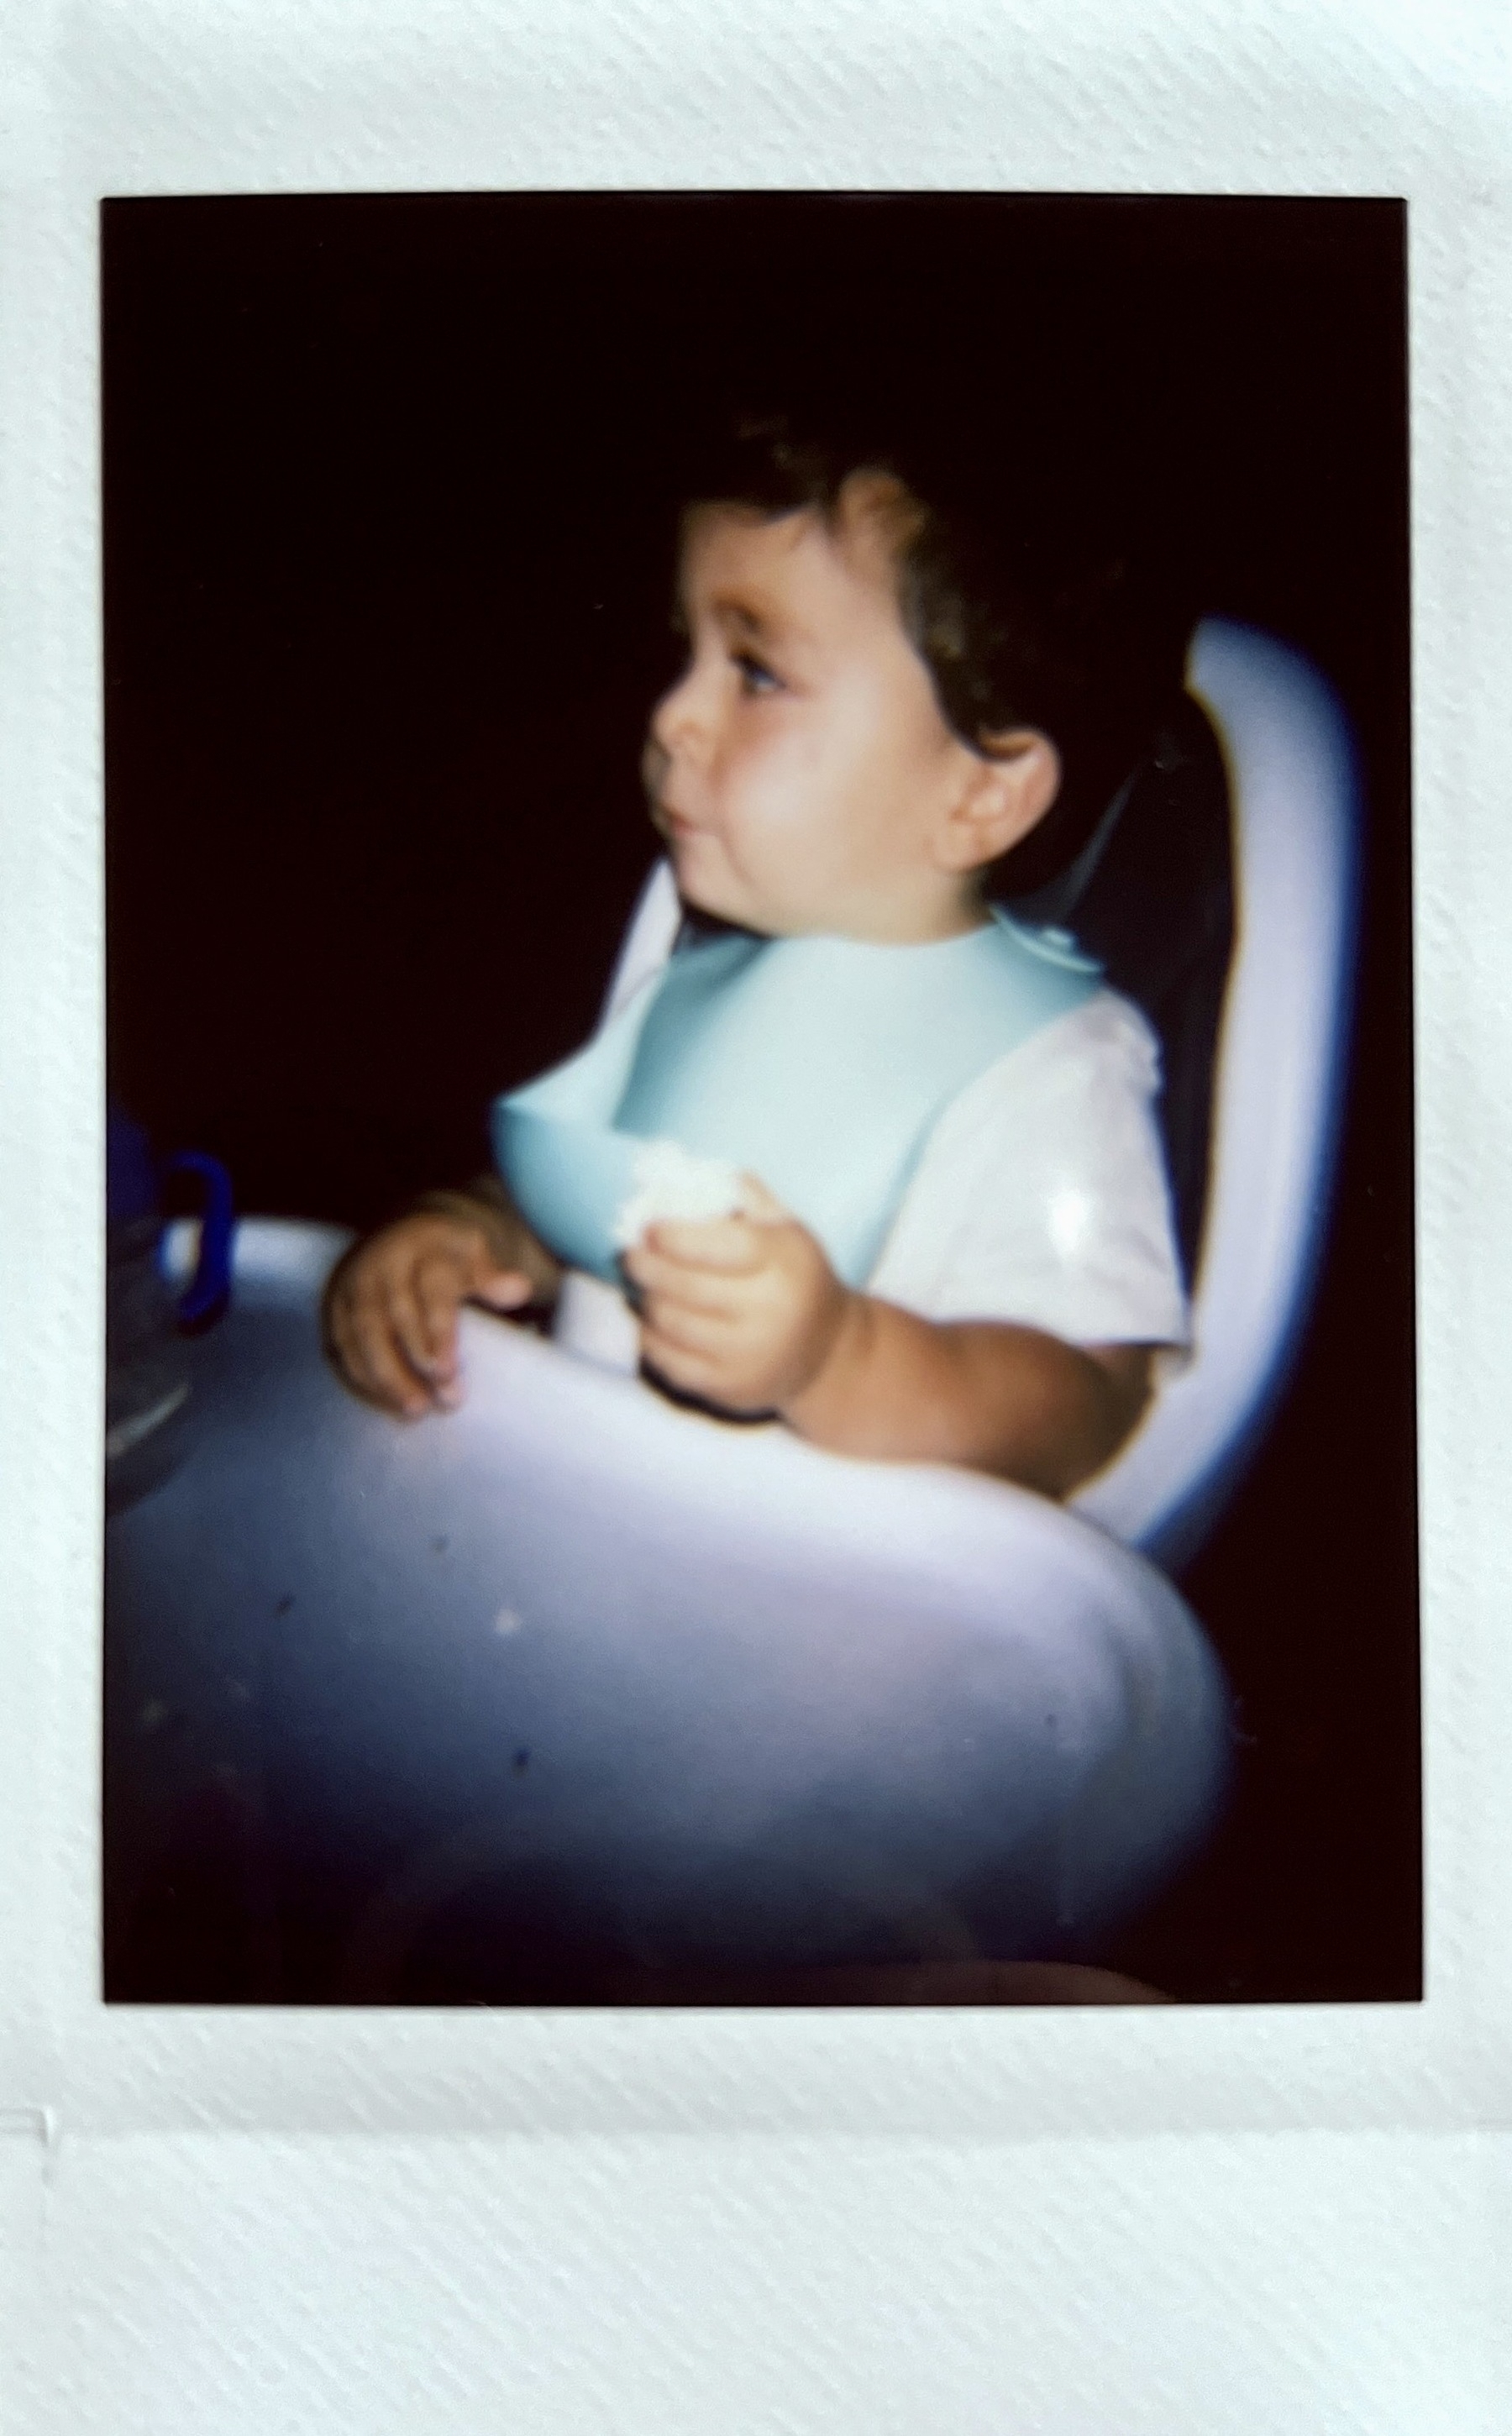 A toddler sits in a high chair.